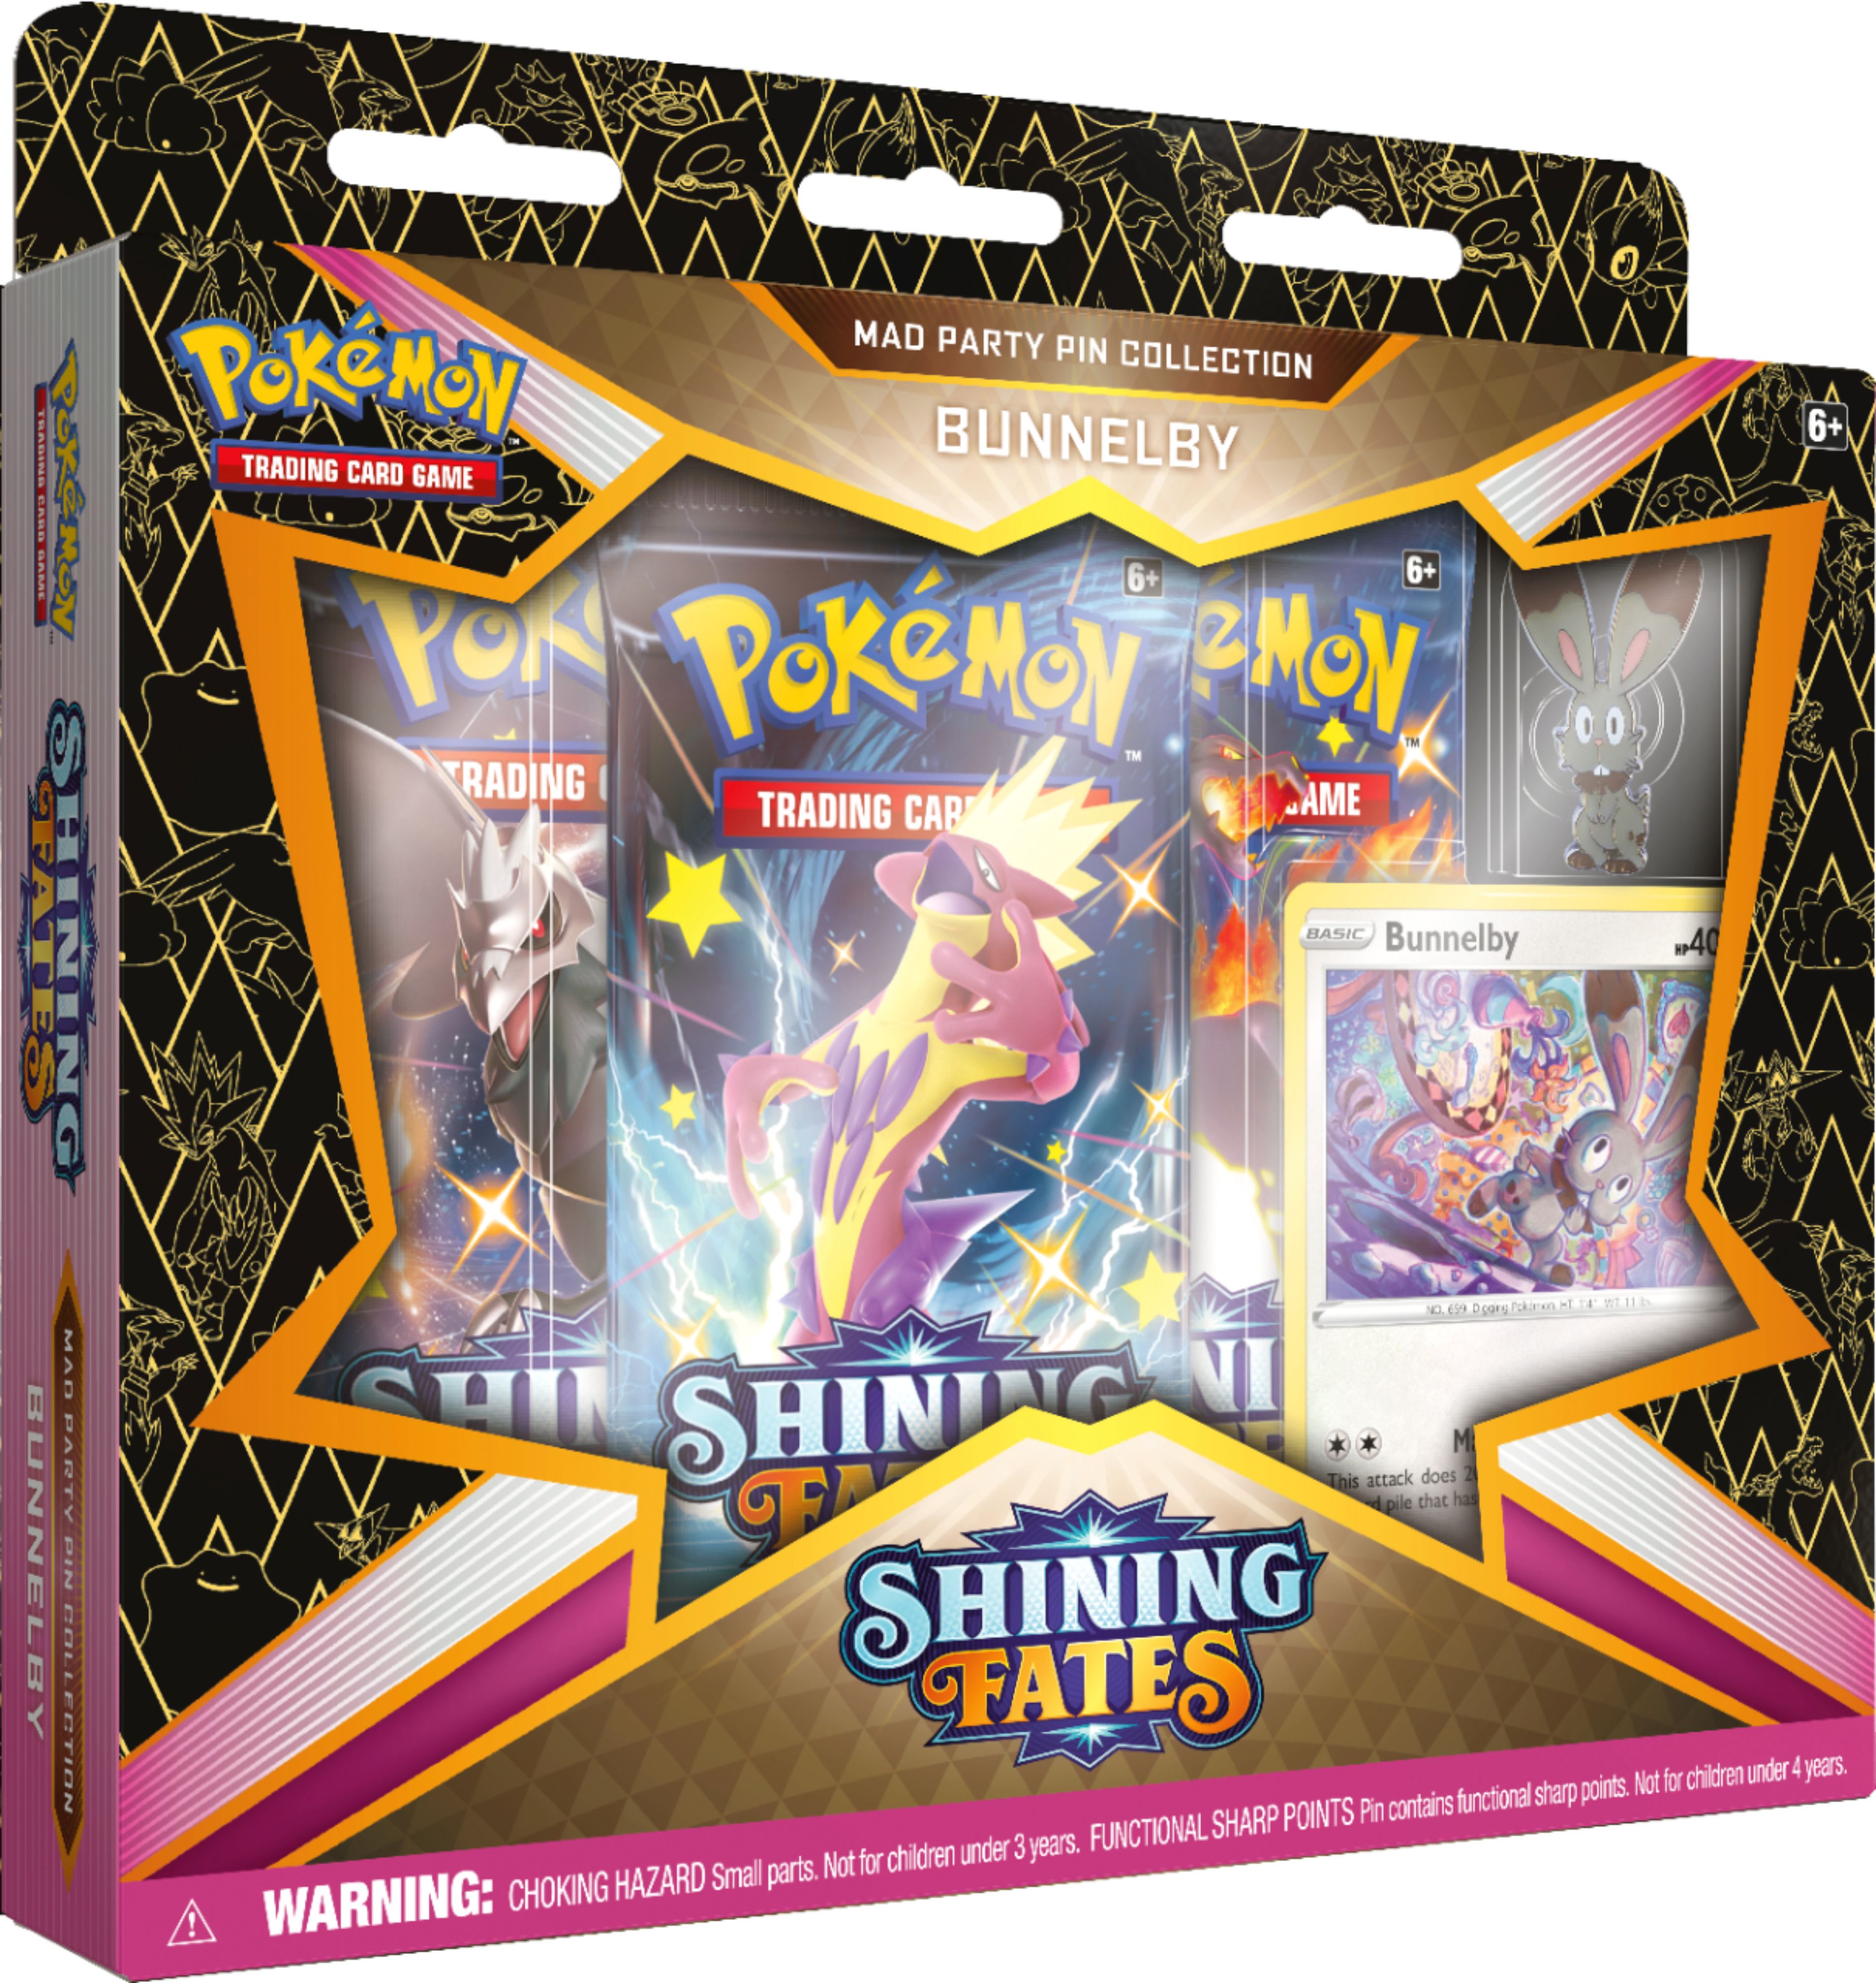 Pokémon TCG for sale online Galarian Mr. Rime Shining Fates Mad Party Pin Collections Box 